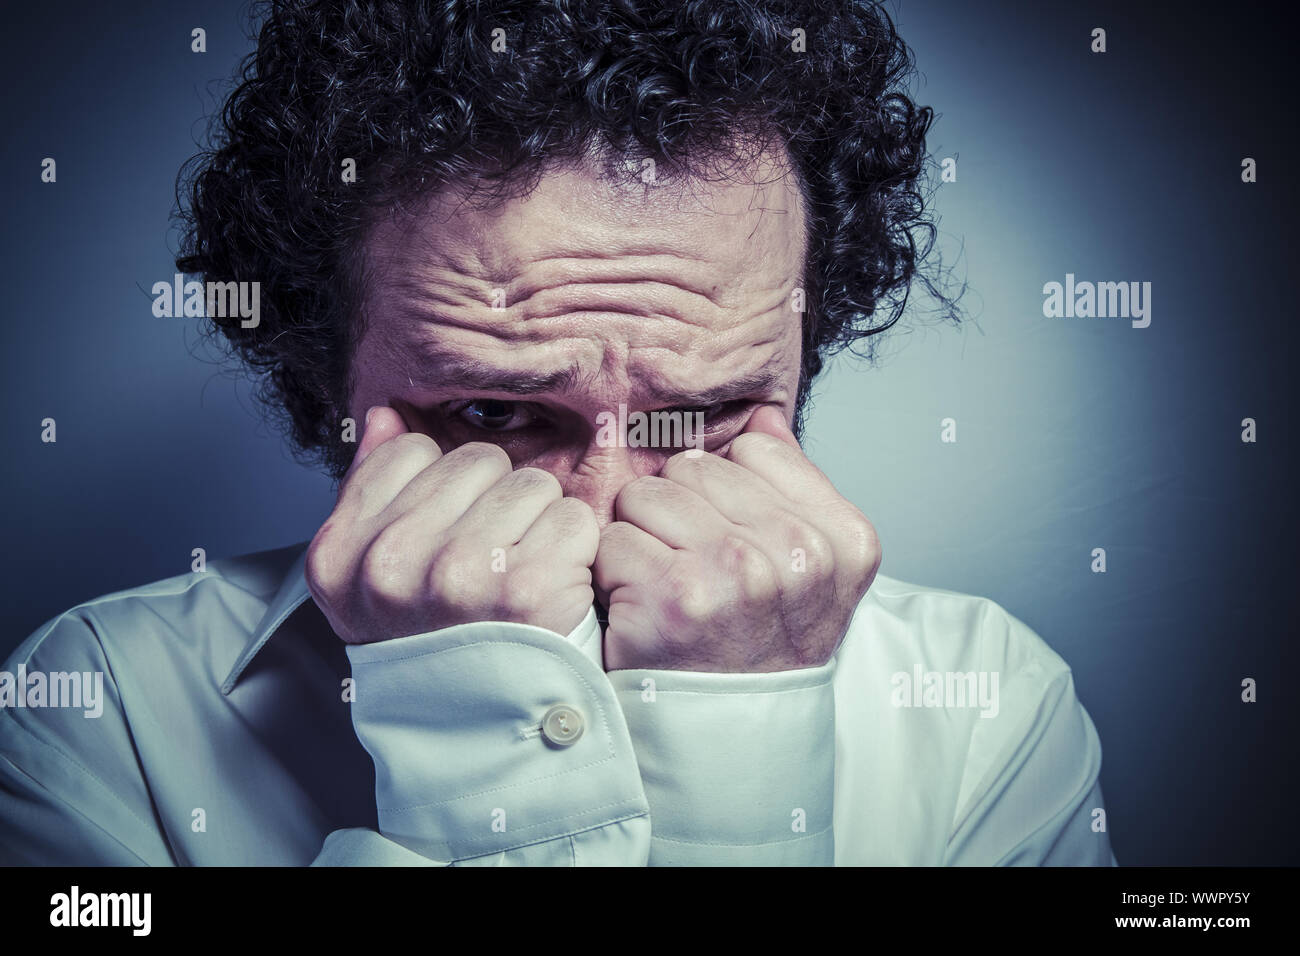 Fear, man with intense expression, white shirt Stock Photo